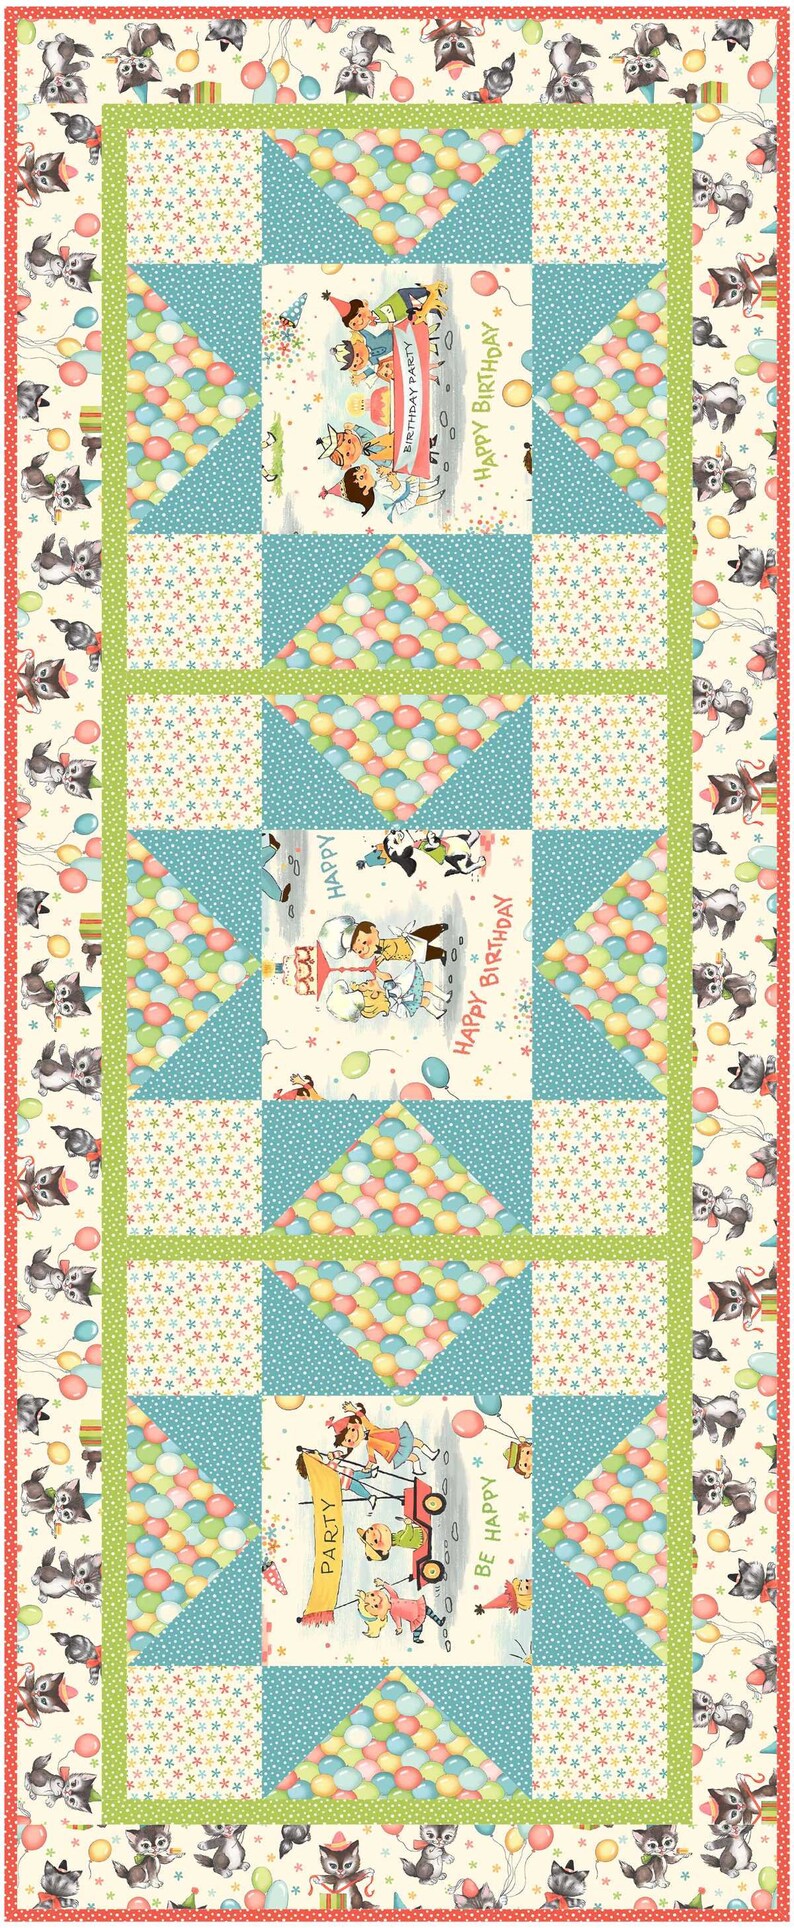 Quick Star large quilted table runner pattern, directions, The Fabric Addict, Michael Miller image 5